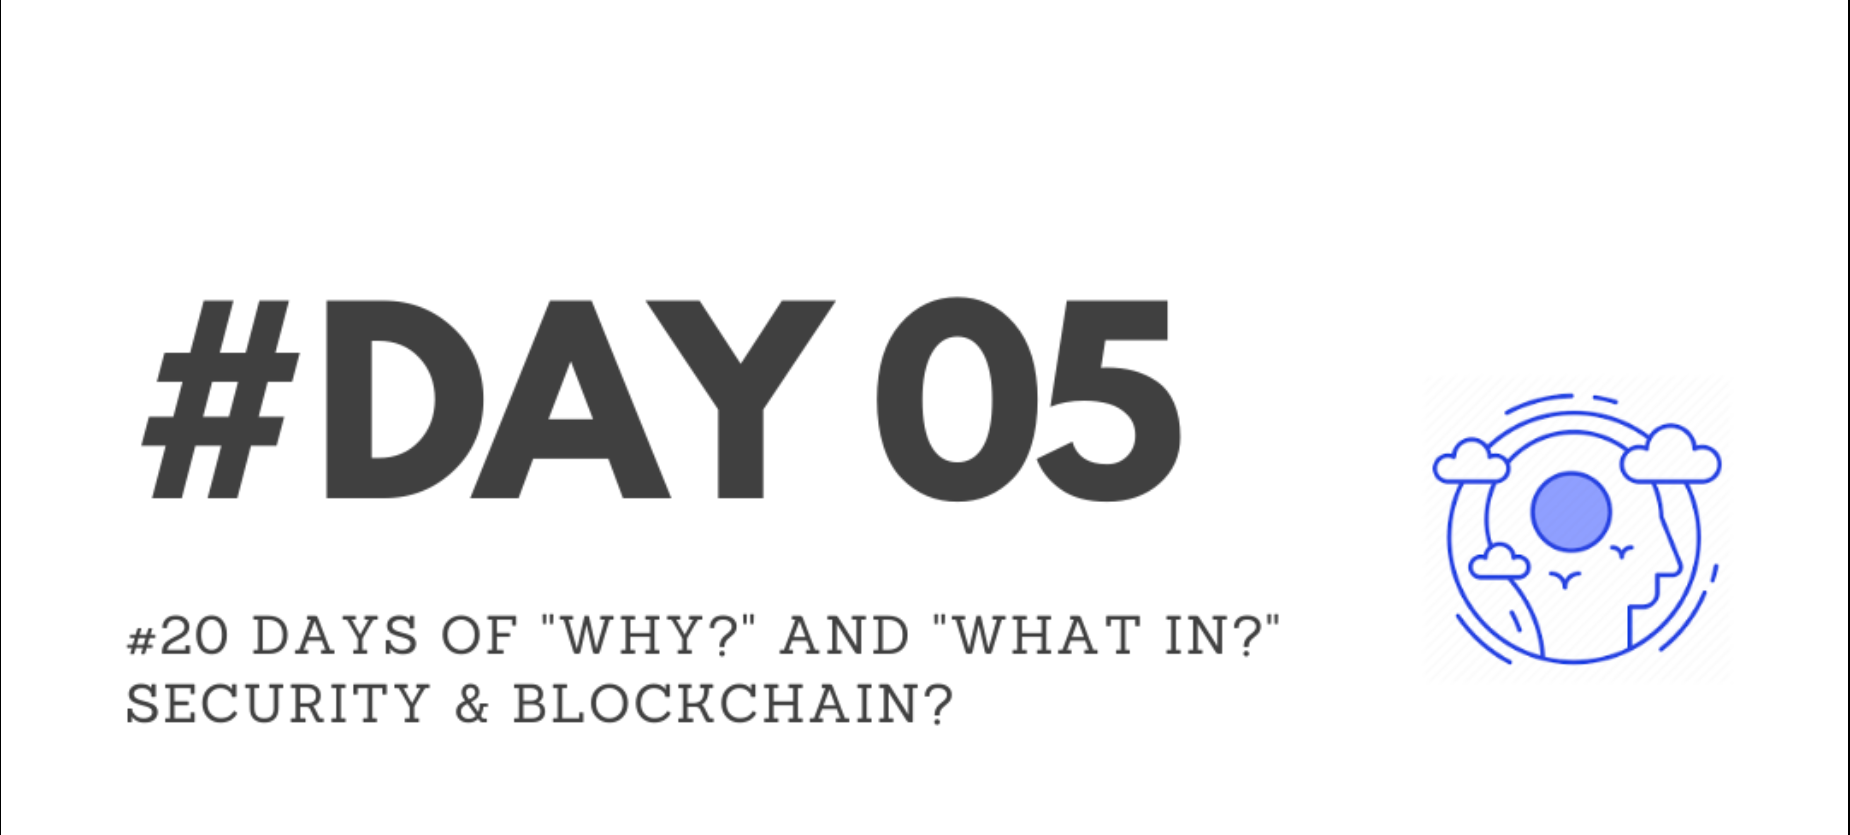 Day05 - "Why?" & "What in?" Security & Blockchain?